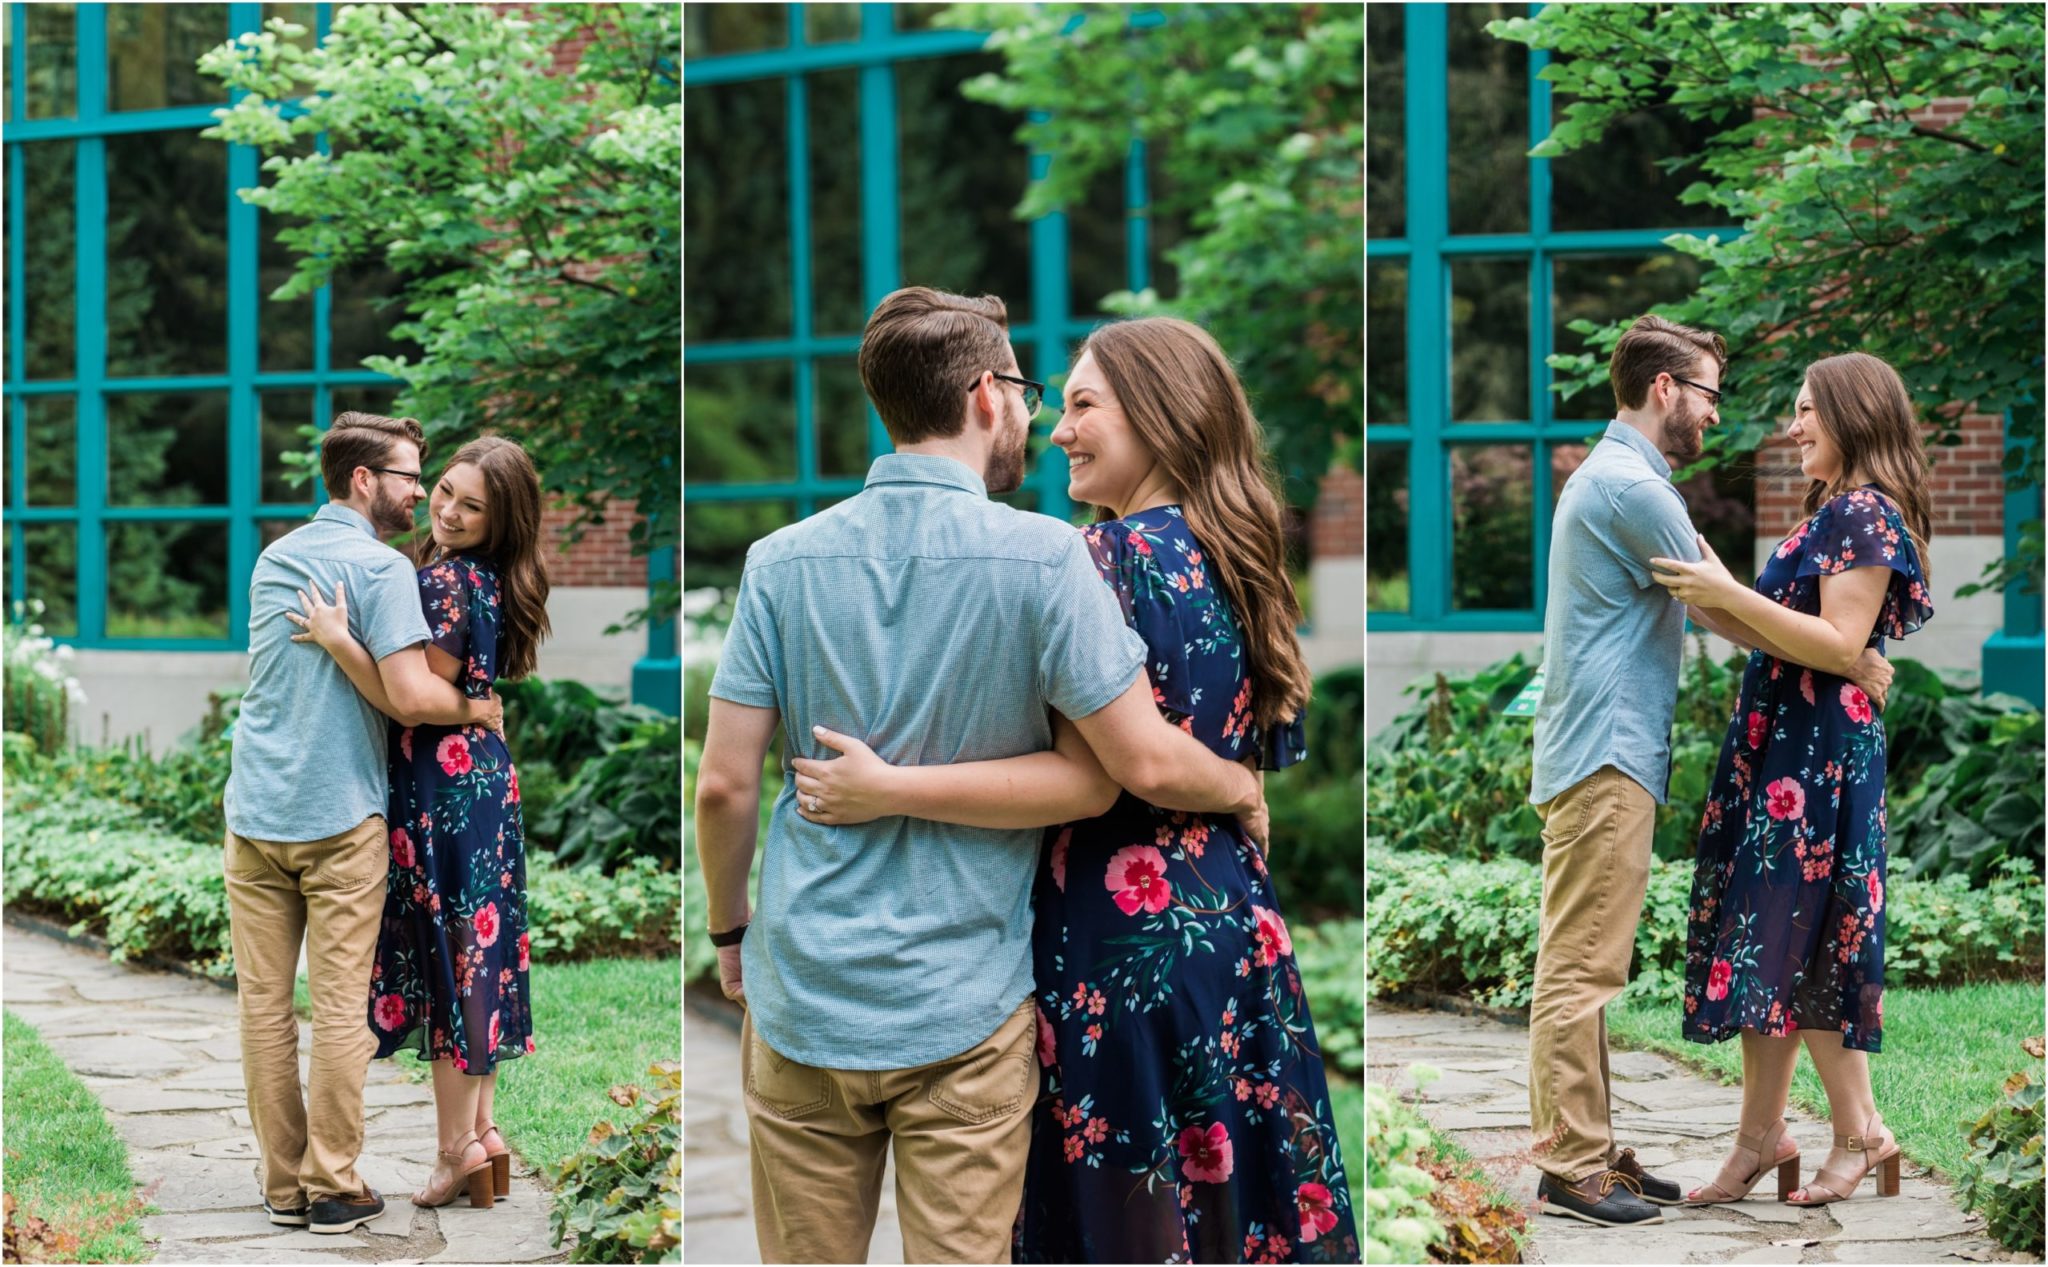 Collage image of couple portraits walking and embracing in a summer garden.